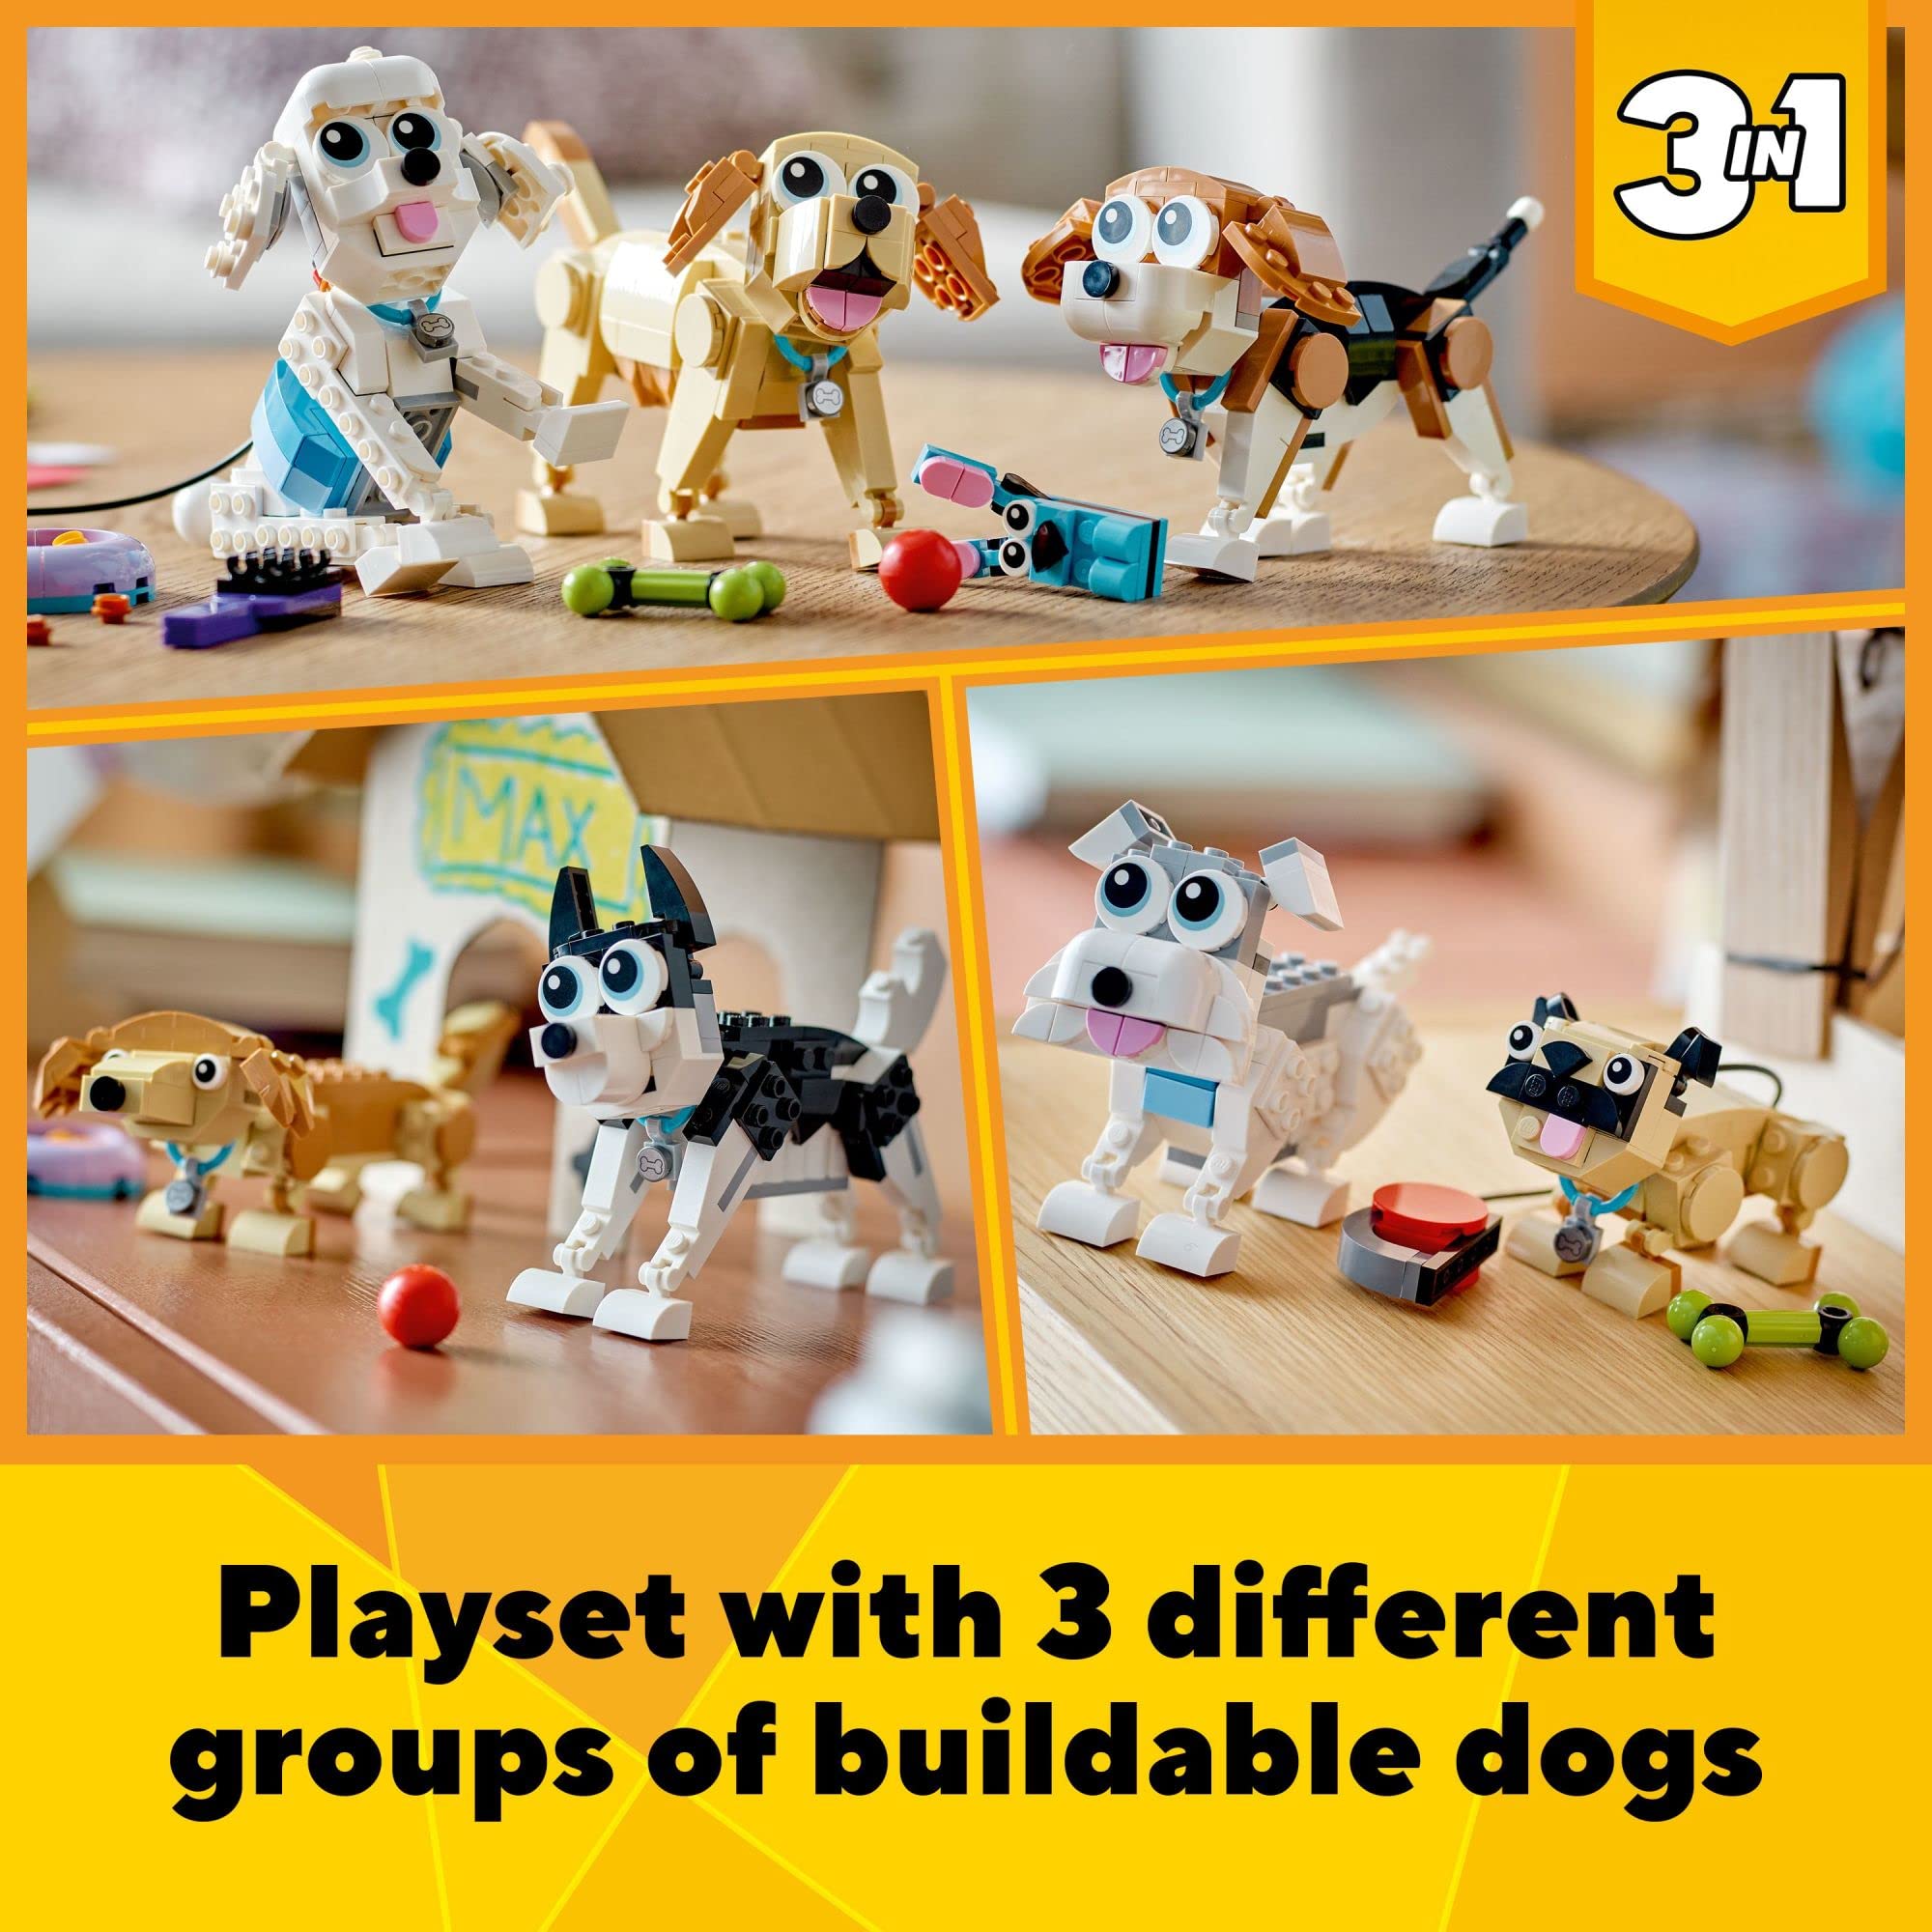 LEGO Creator 3-in-1 Adorable Dogs Building Toy Set 31137, Gift for Dog Lovers, Featuring Dachshund, Beagle, Pug, Poodle, Husky, and Labrador Figures for Kids 7 and Up